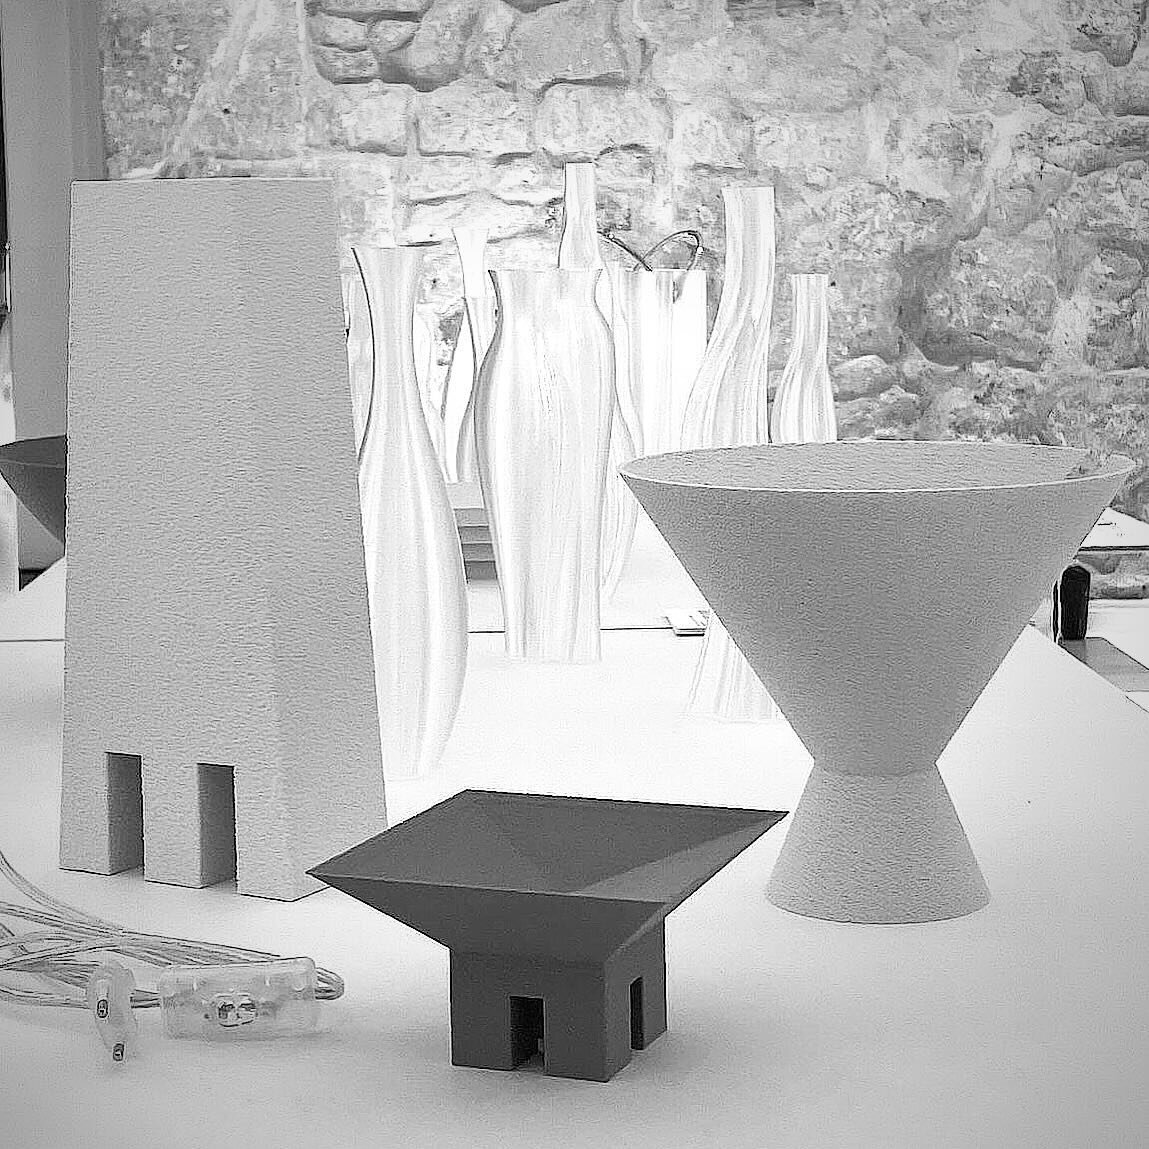 Always surprising with their amazing shapes, @argot_studio continues to impress. 
*
*

#3dprinting #wases #designsubstancial #sustainability #3dprintbiomaterial